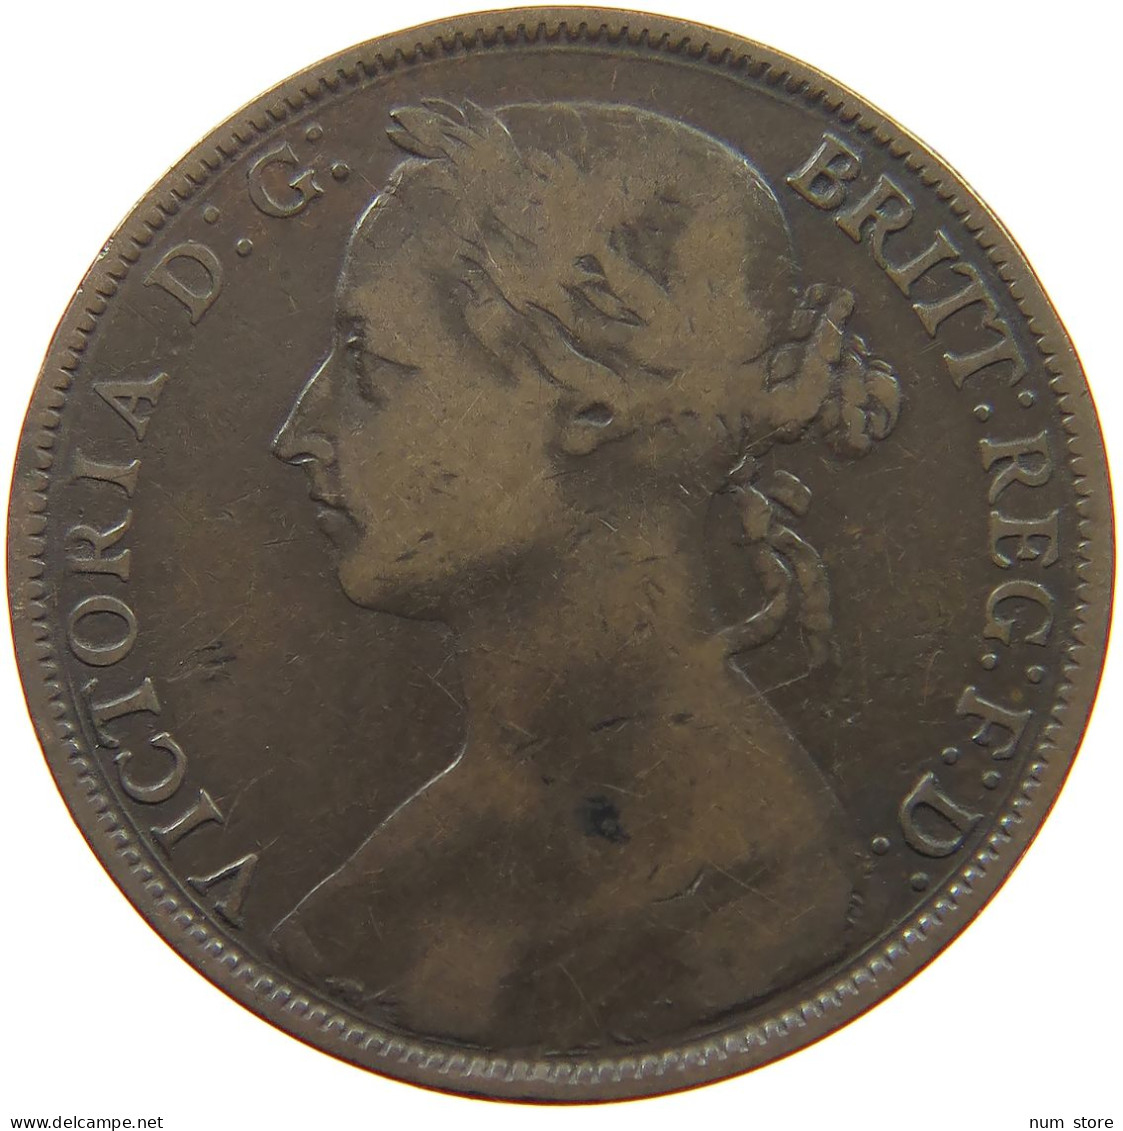 GREAT BRITAIN PENNY 1884 Victoria 1837-1901 #a065 0515 - D. 1 Penny